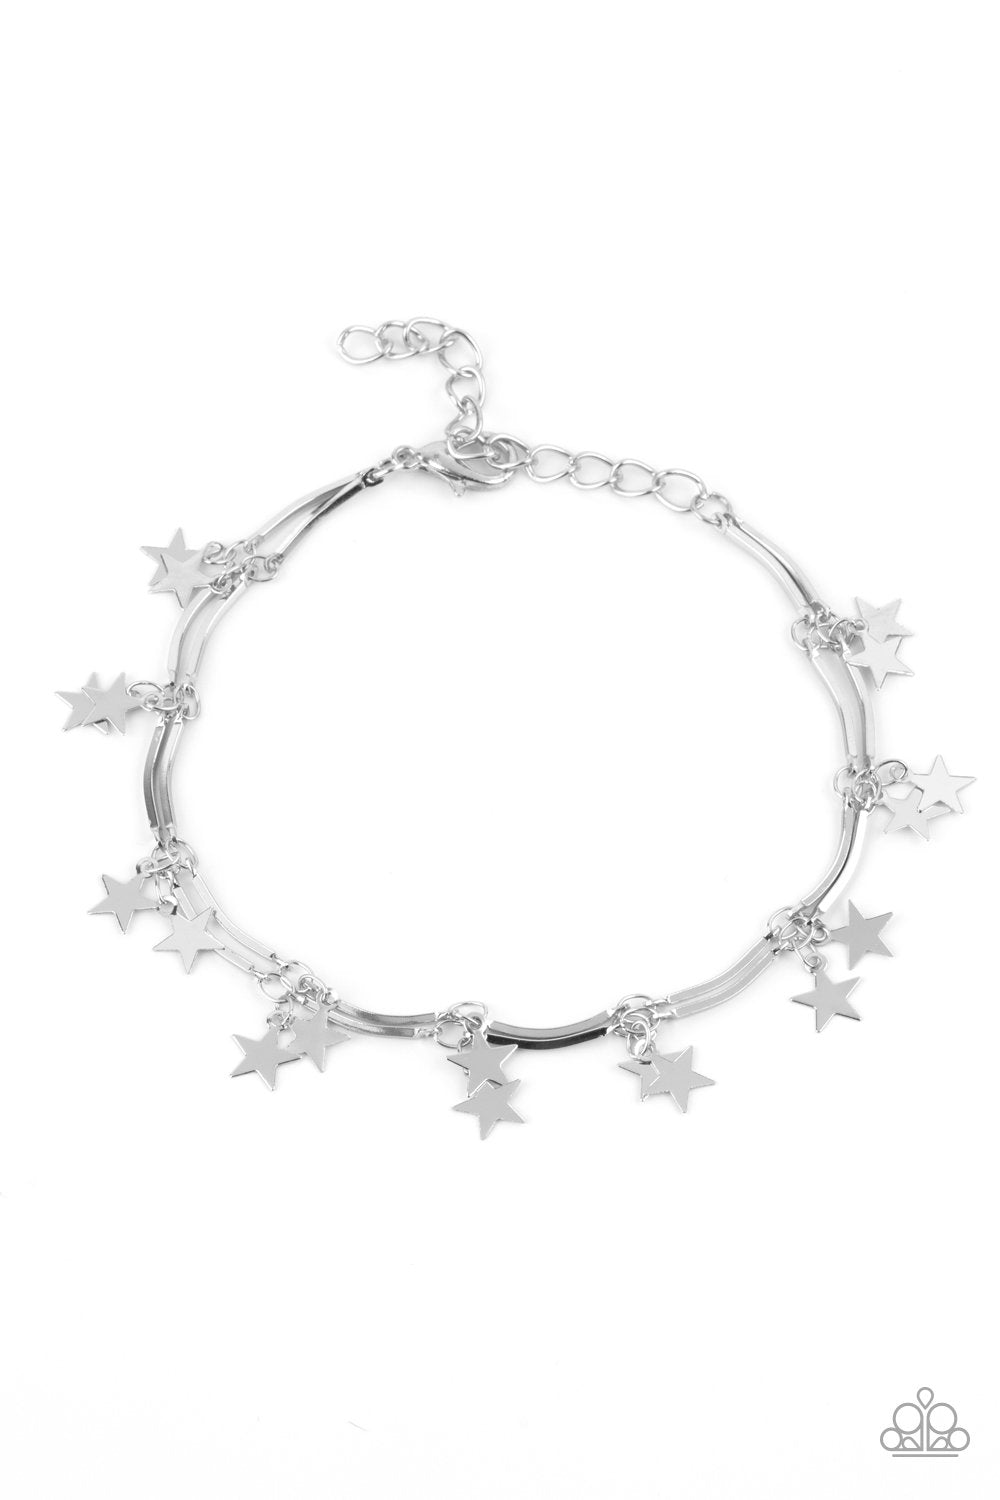 Party In The USA Silver Star Bracelet - Paparazzi Accessories- lightbox - CarasShop.com - $5 Jewelry by Cara Jewels